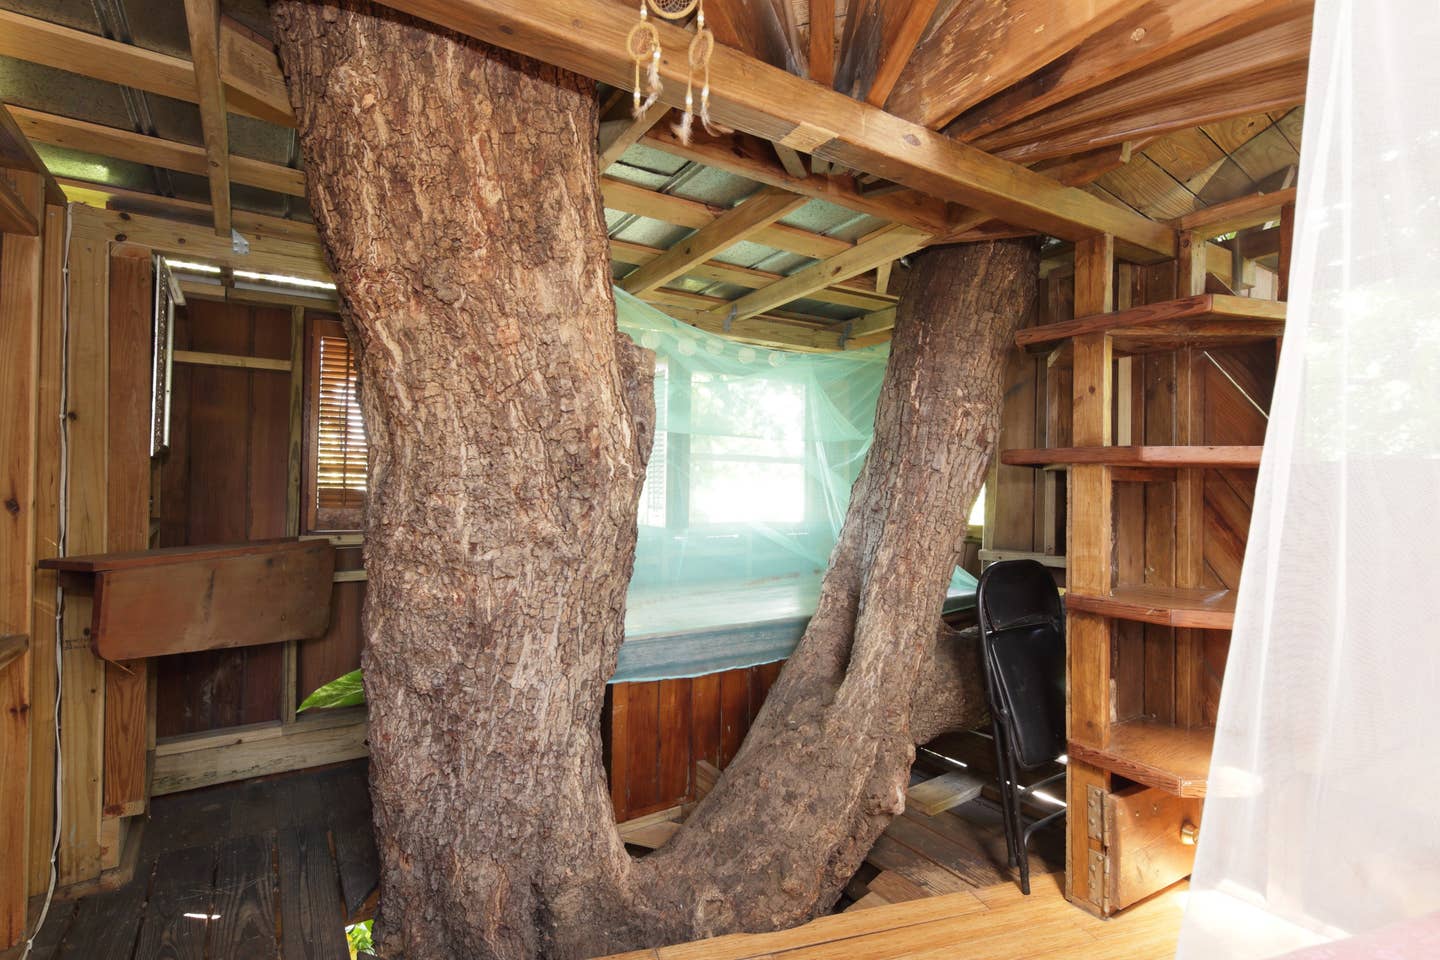 Tree House in Florida. Top 25 Strangest Houses around the World - 16